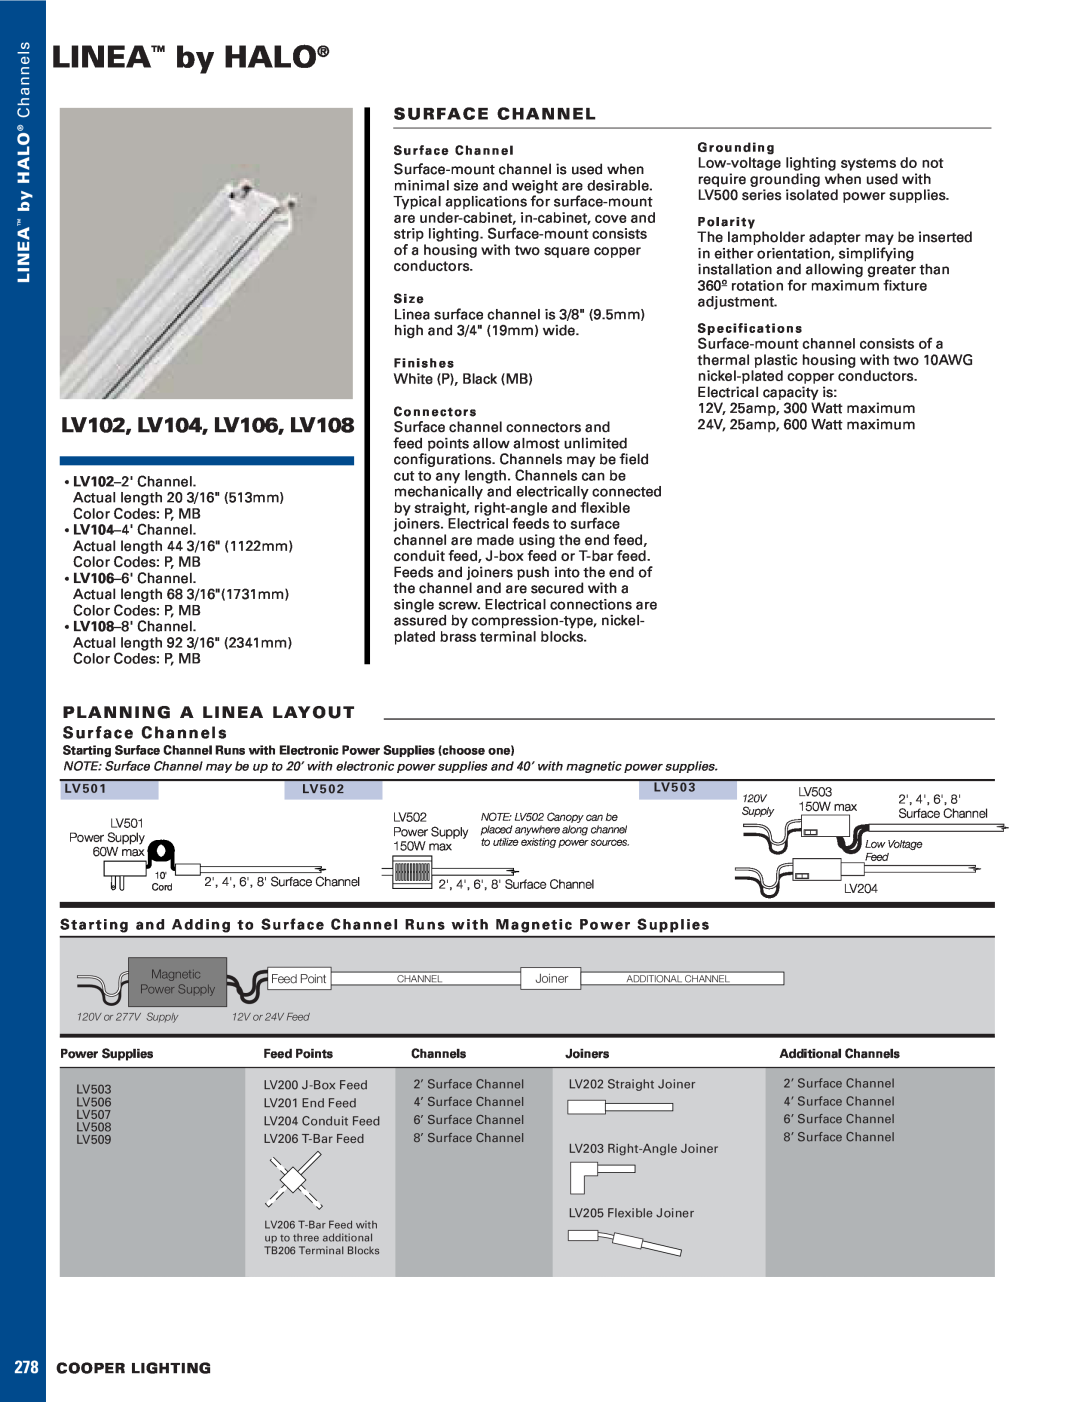 Halo Lighting System specifications LINEA by HALO, LV102, LV104, LV106, LV108, Channels, S U R Fa C E C H A N N E L 